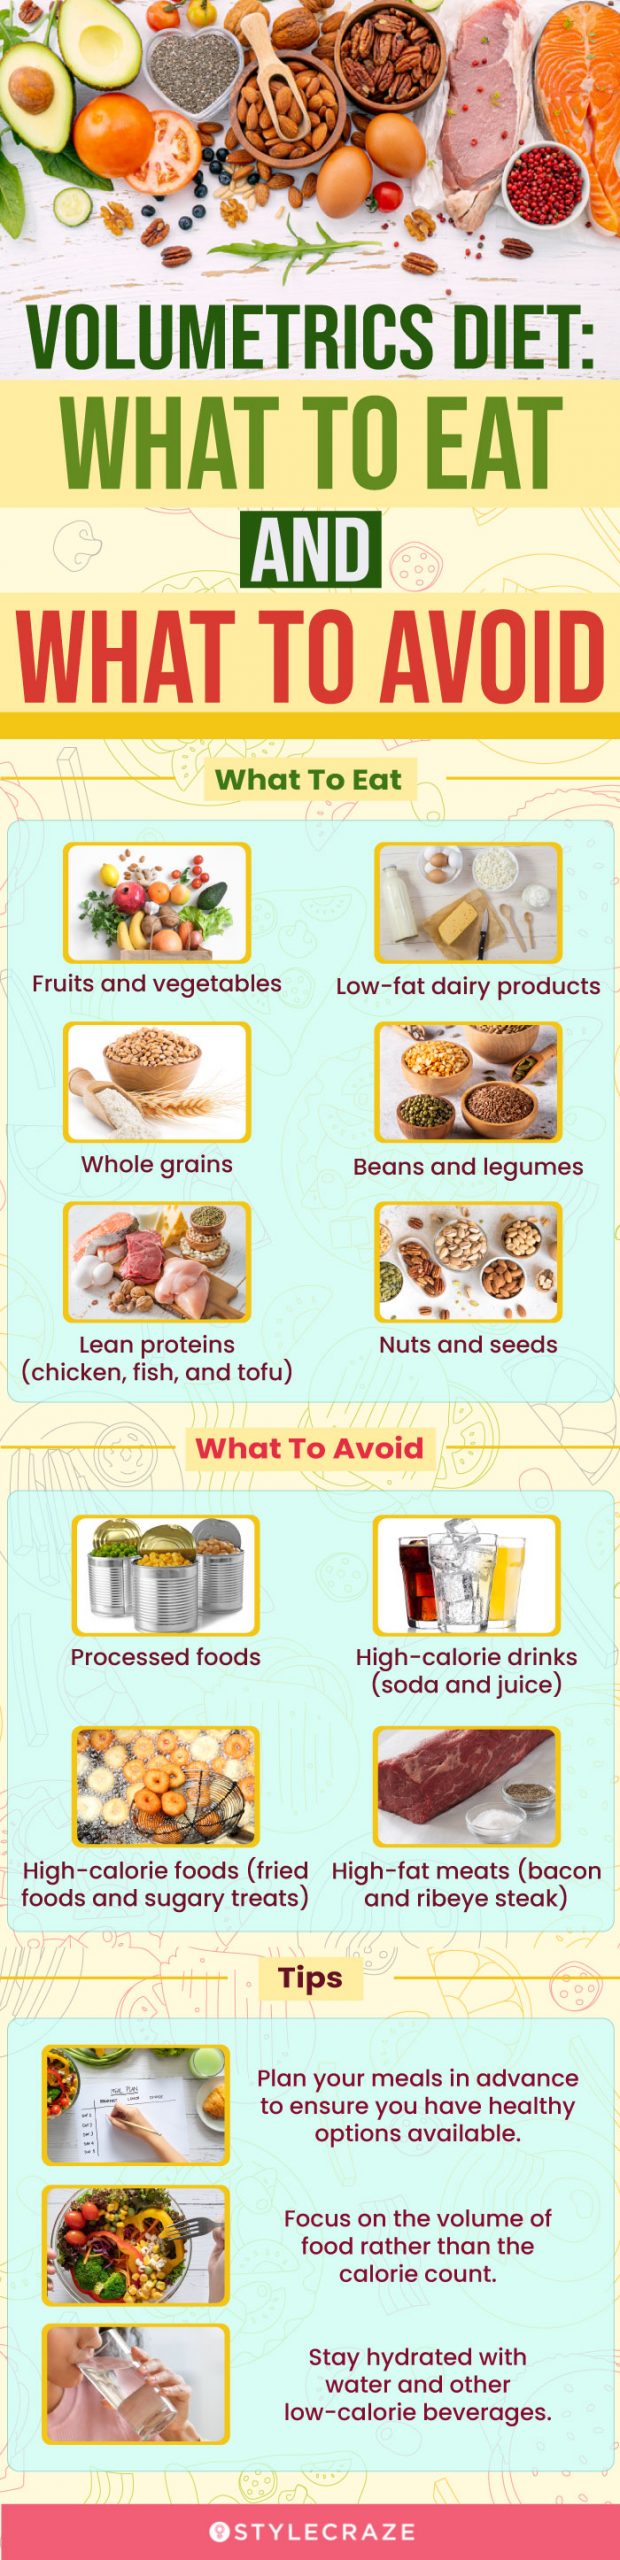 volumetrics diet what to eat and what to avoid (infographic)